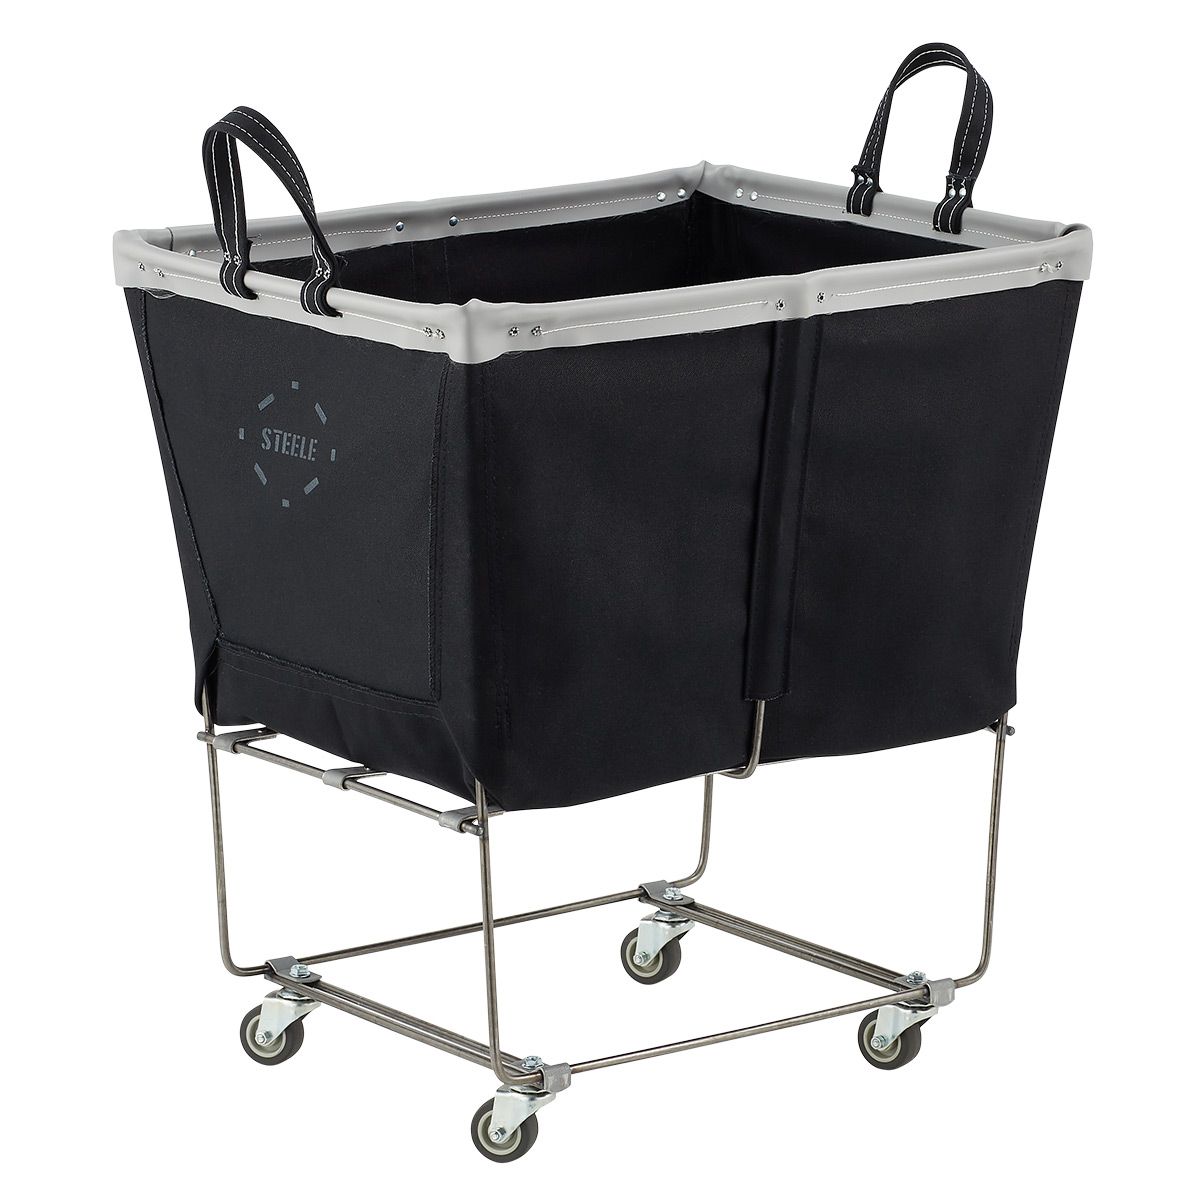 Steele Canvas Natural Laundry Carts | The Container Store